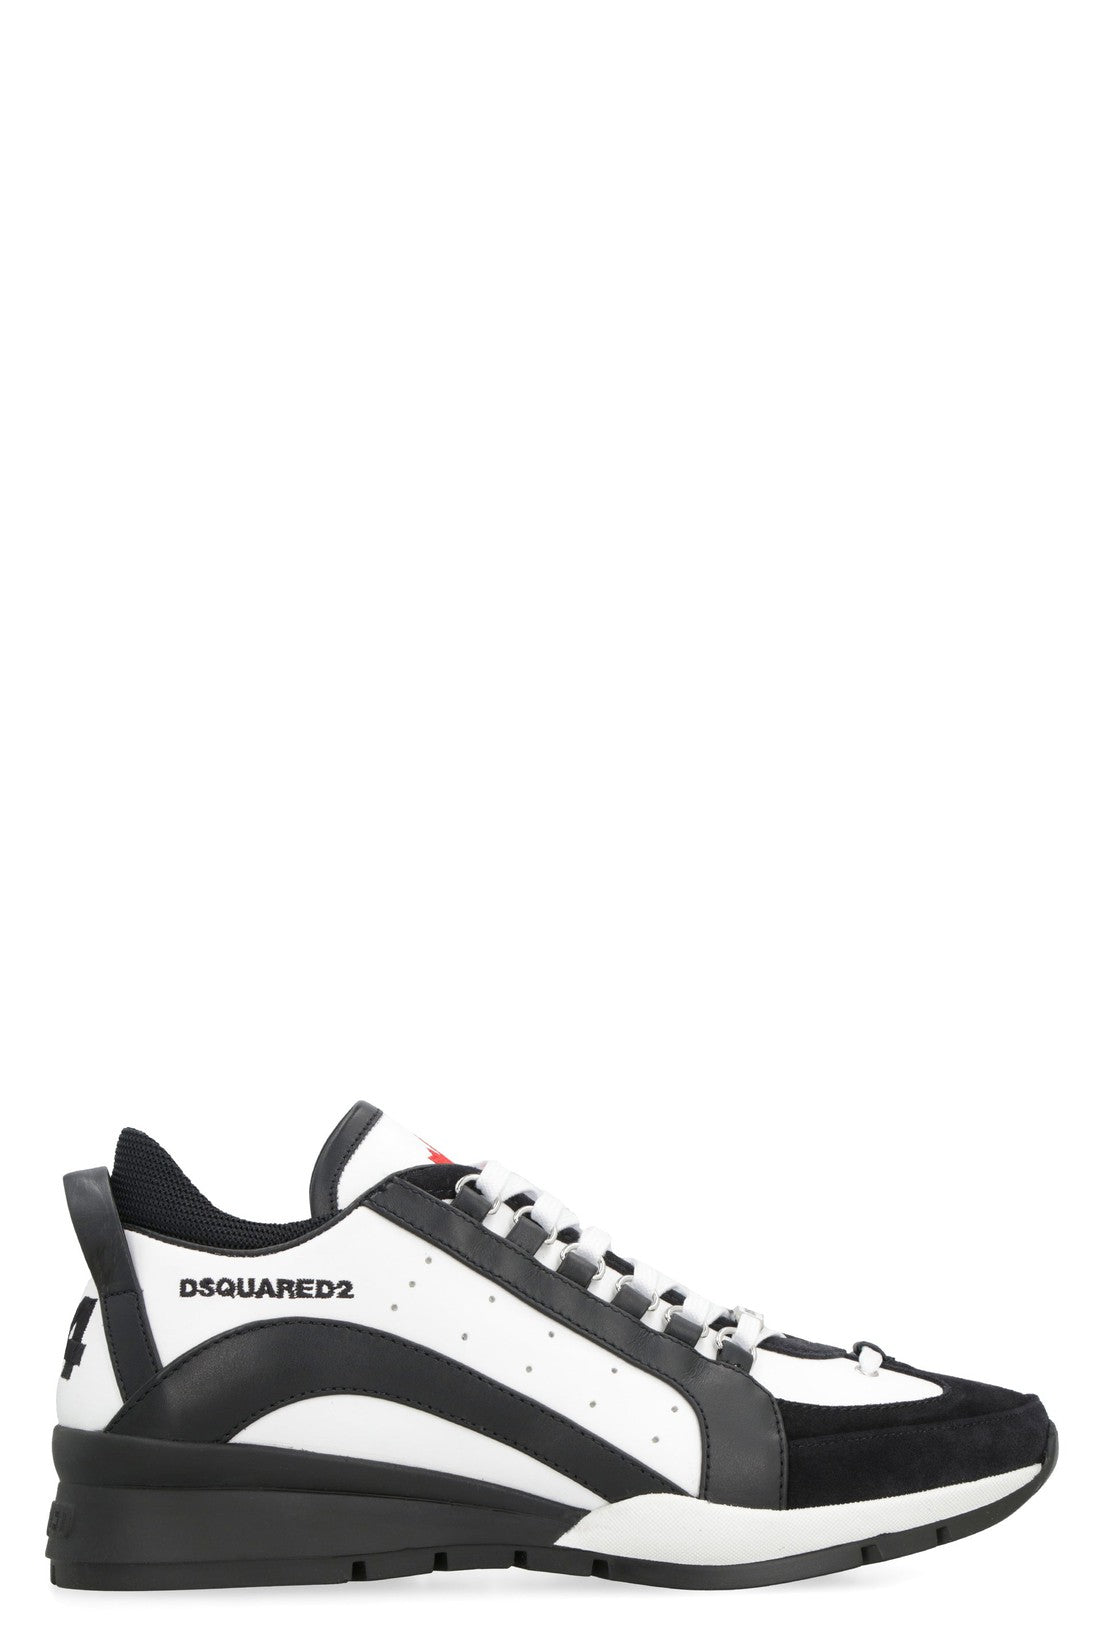 Dsquared2-OUTLET-SALE-Legendary leather low-top sneakers-ARCHIVIST